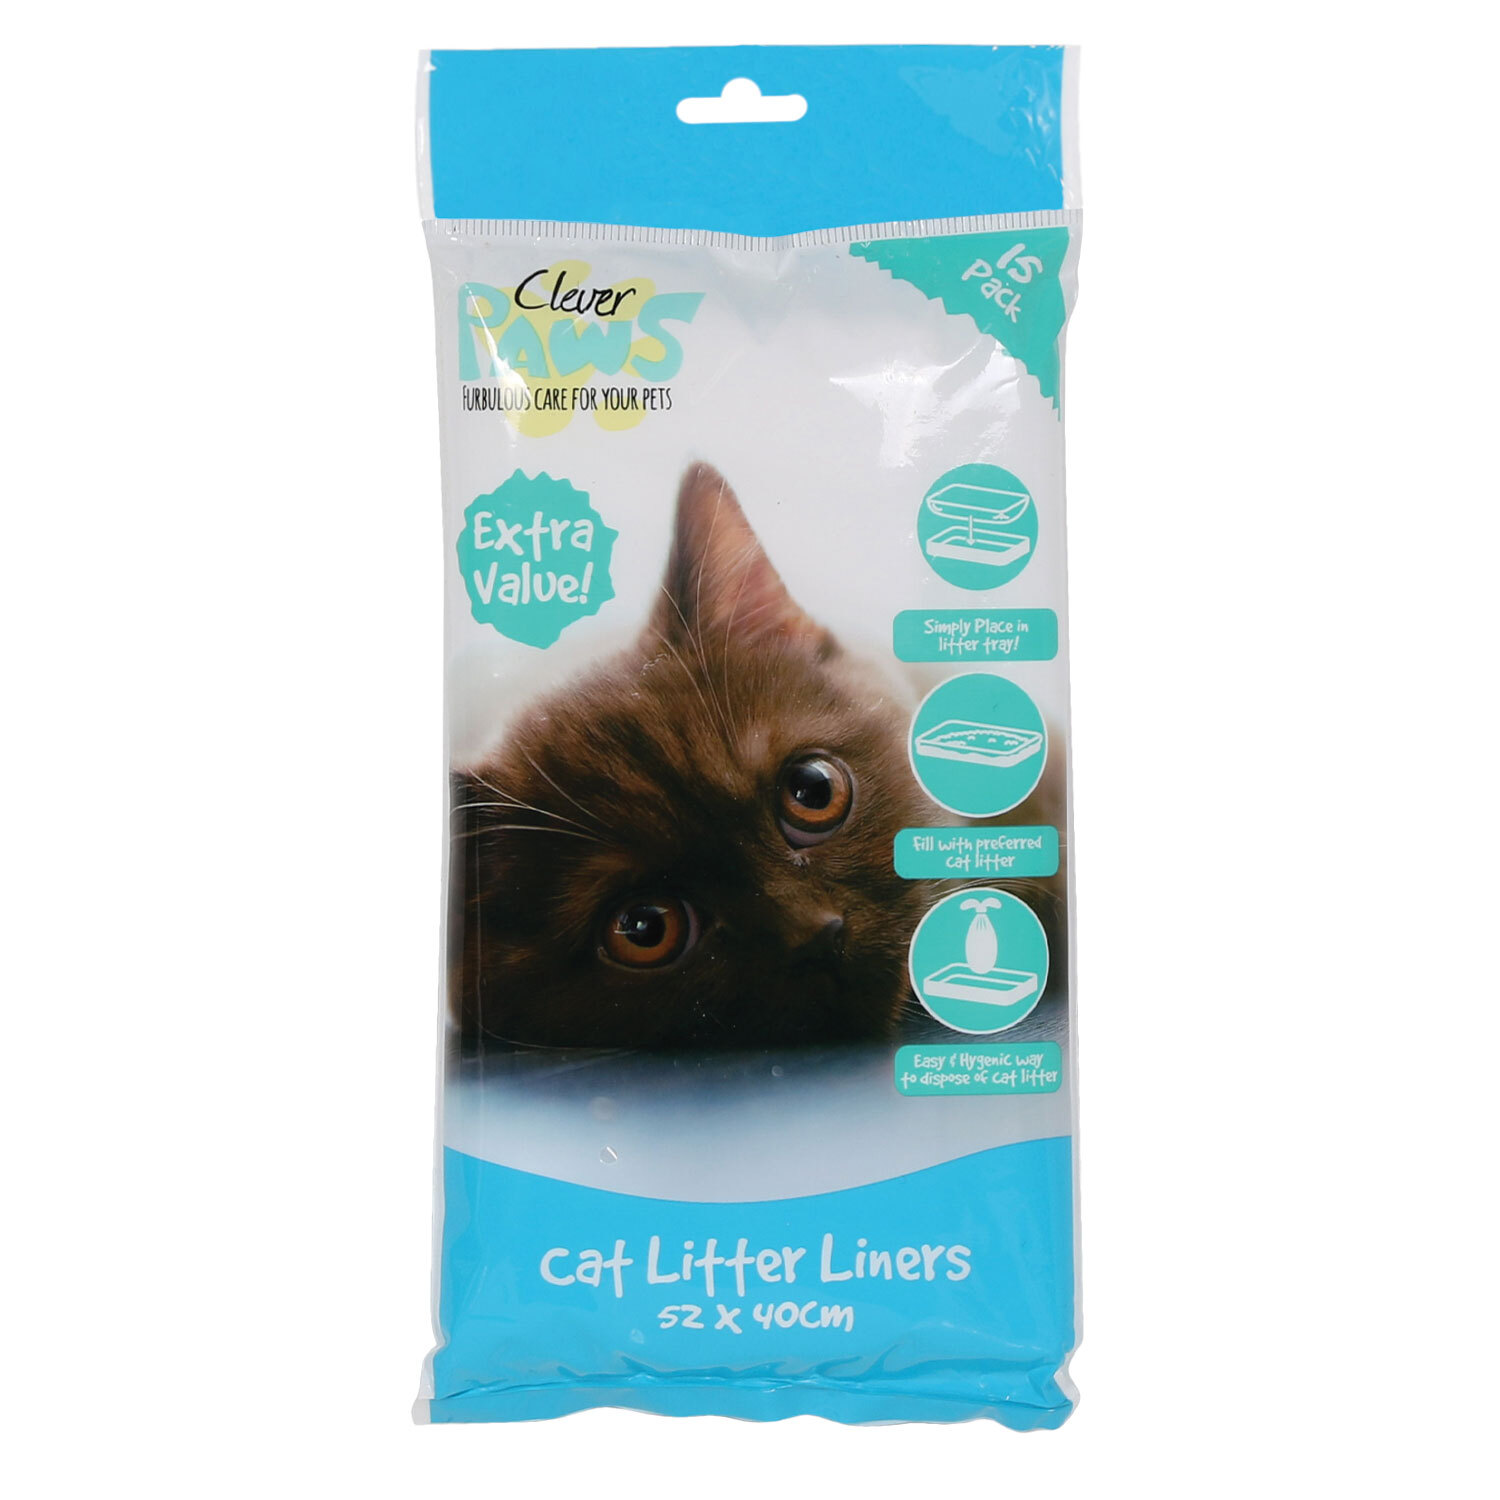 Clever Paws Cat Litter Liner 15 Pack Image